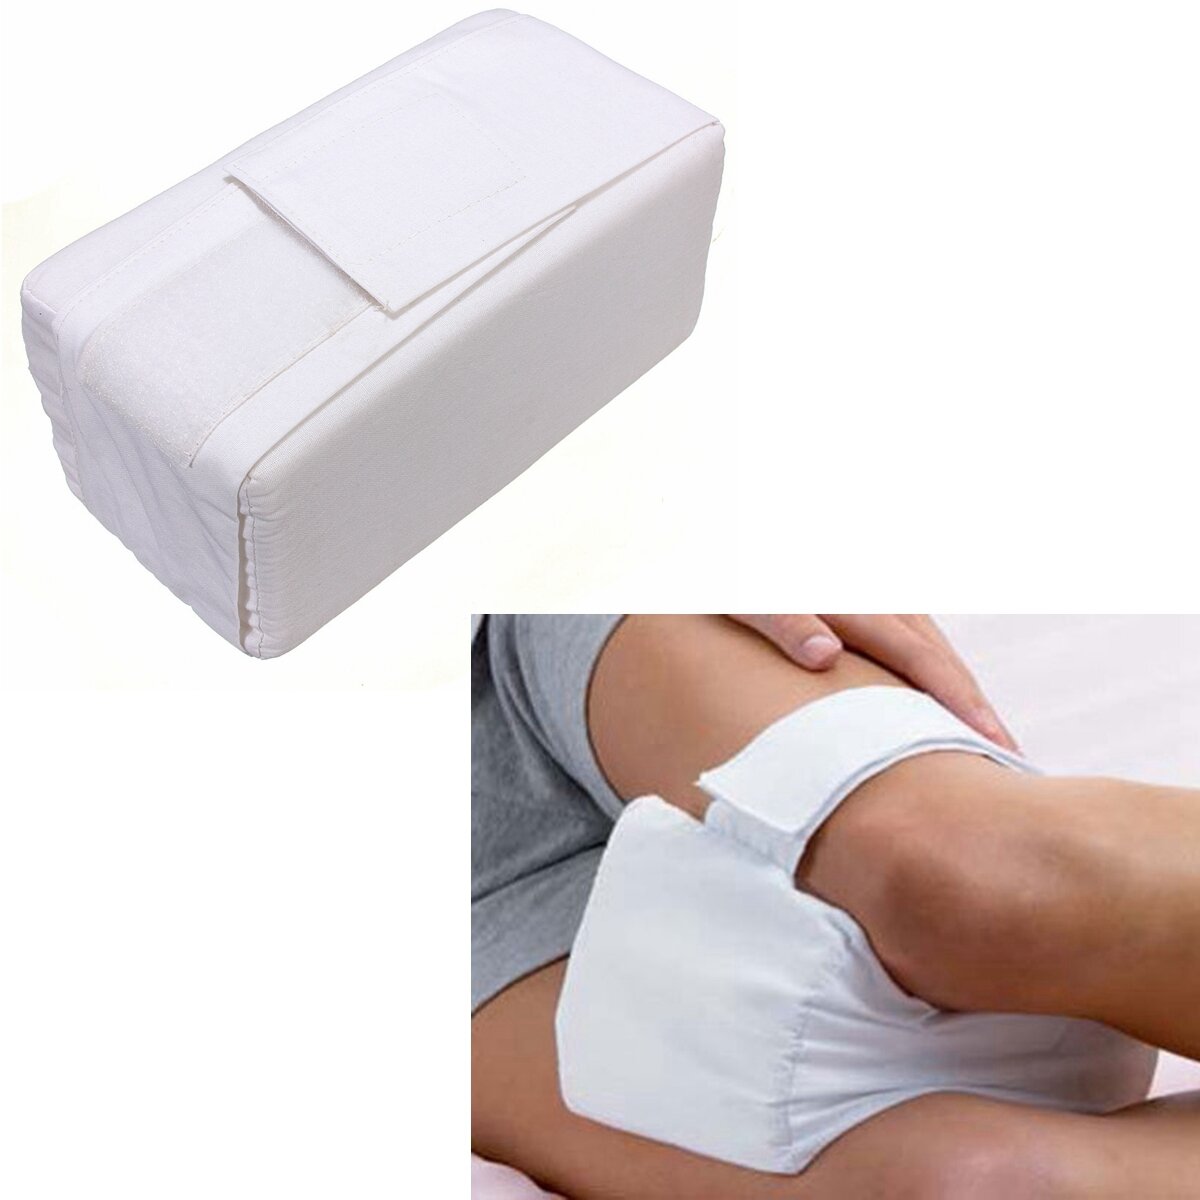 EP_ Knee Pillows Lower Back Pain Relieve Arthritic Joints Ankle Sponge Pads Prec 